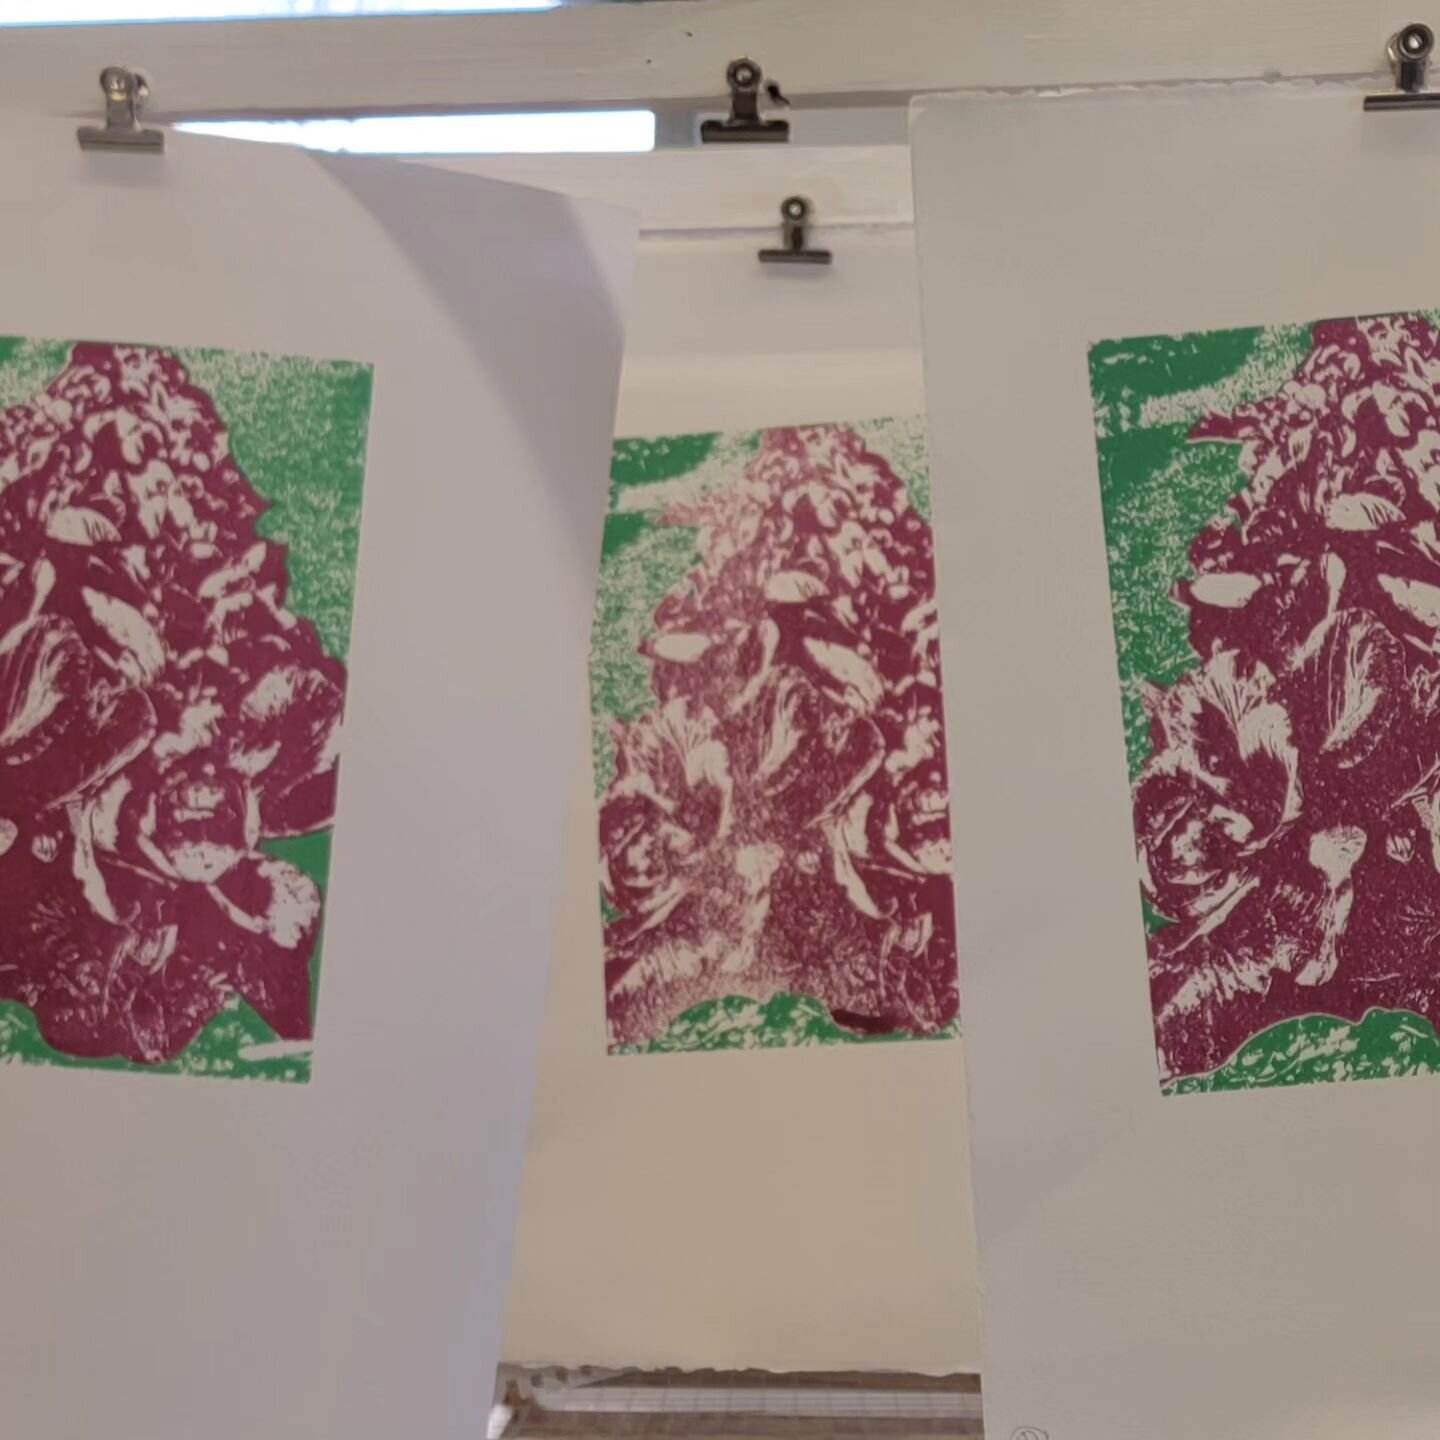 Some outstanding work produced during this weekends screen printing workshop gracefield art centre.